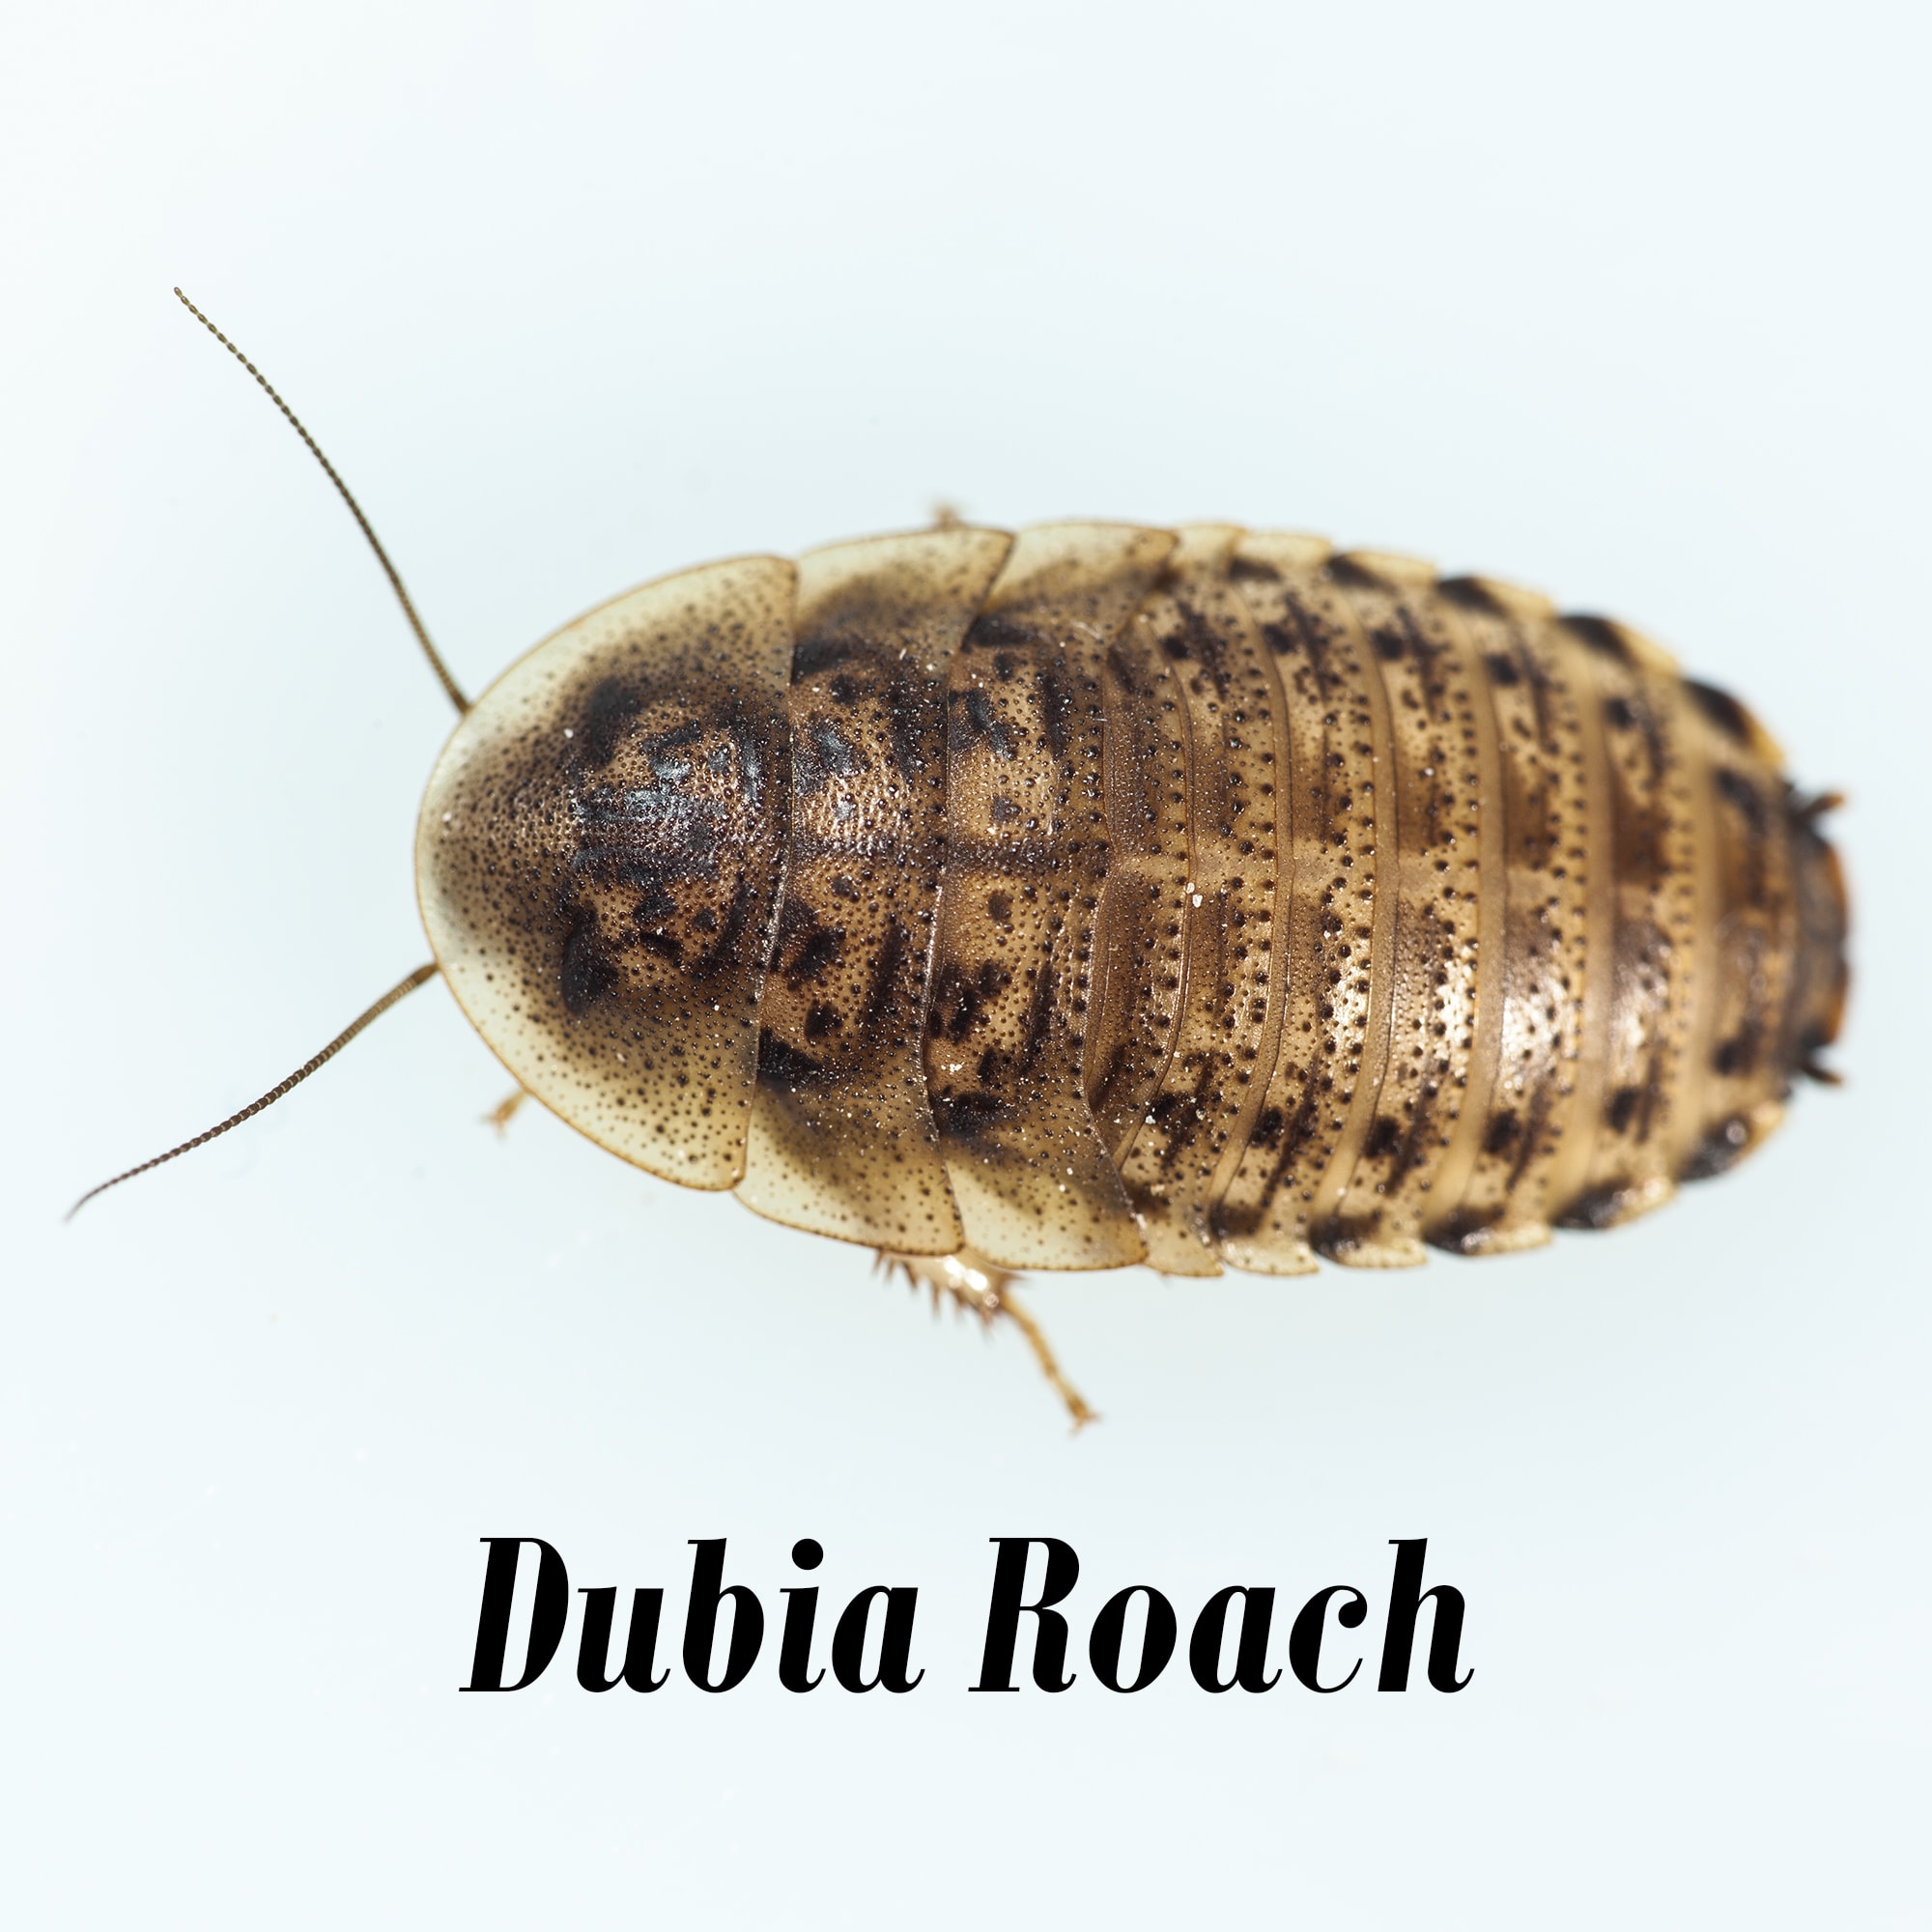 Dubia Roaches 100 Small Sizes  1/4 to 3/8 inch Free and Fast Shipping 